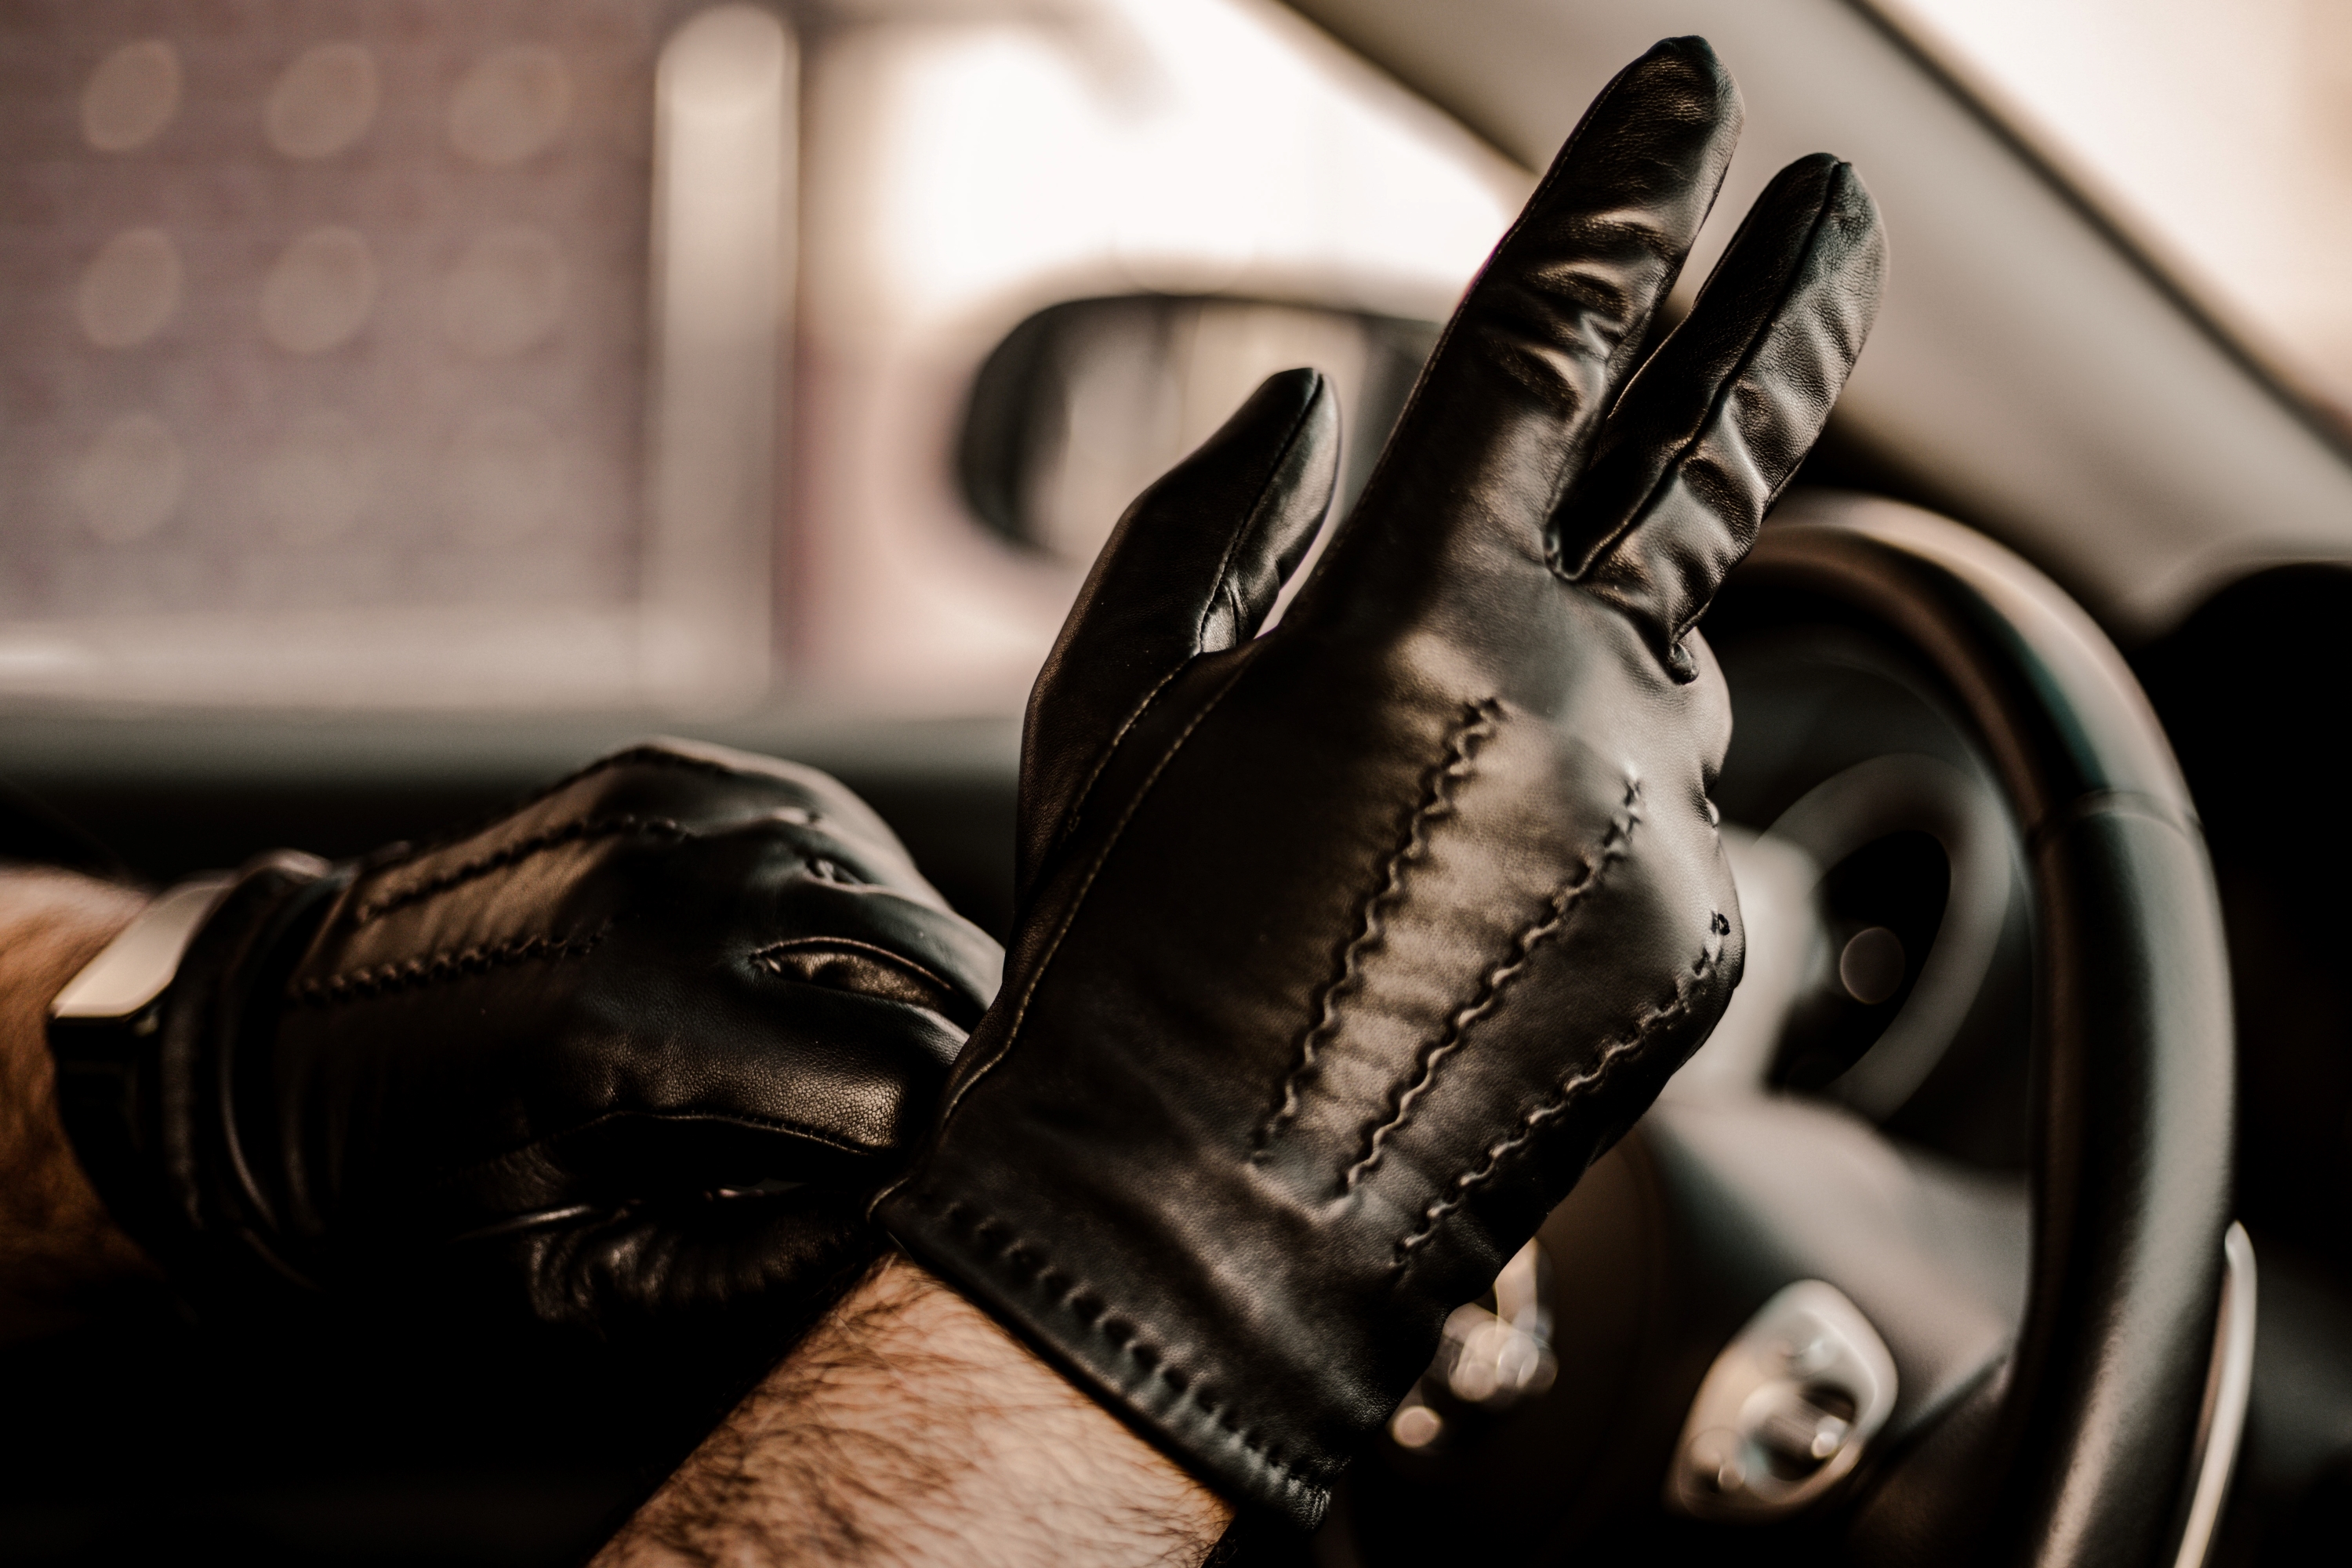 These Driving Gloves Are Meant to Protect Hands Against Sun Damage